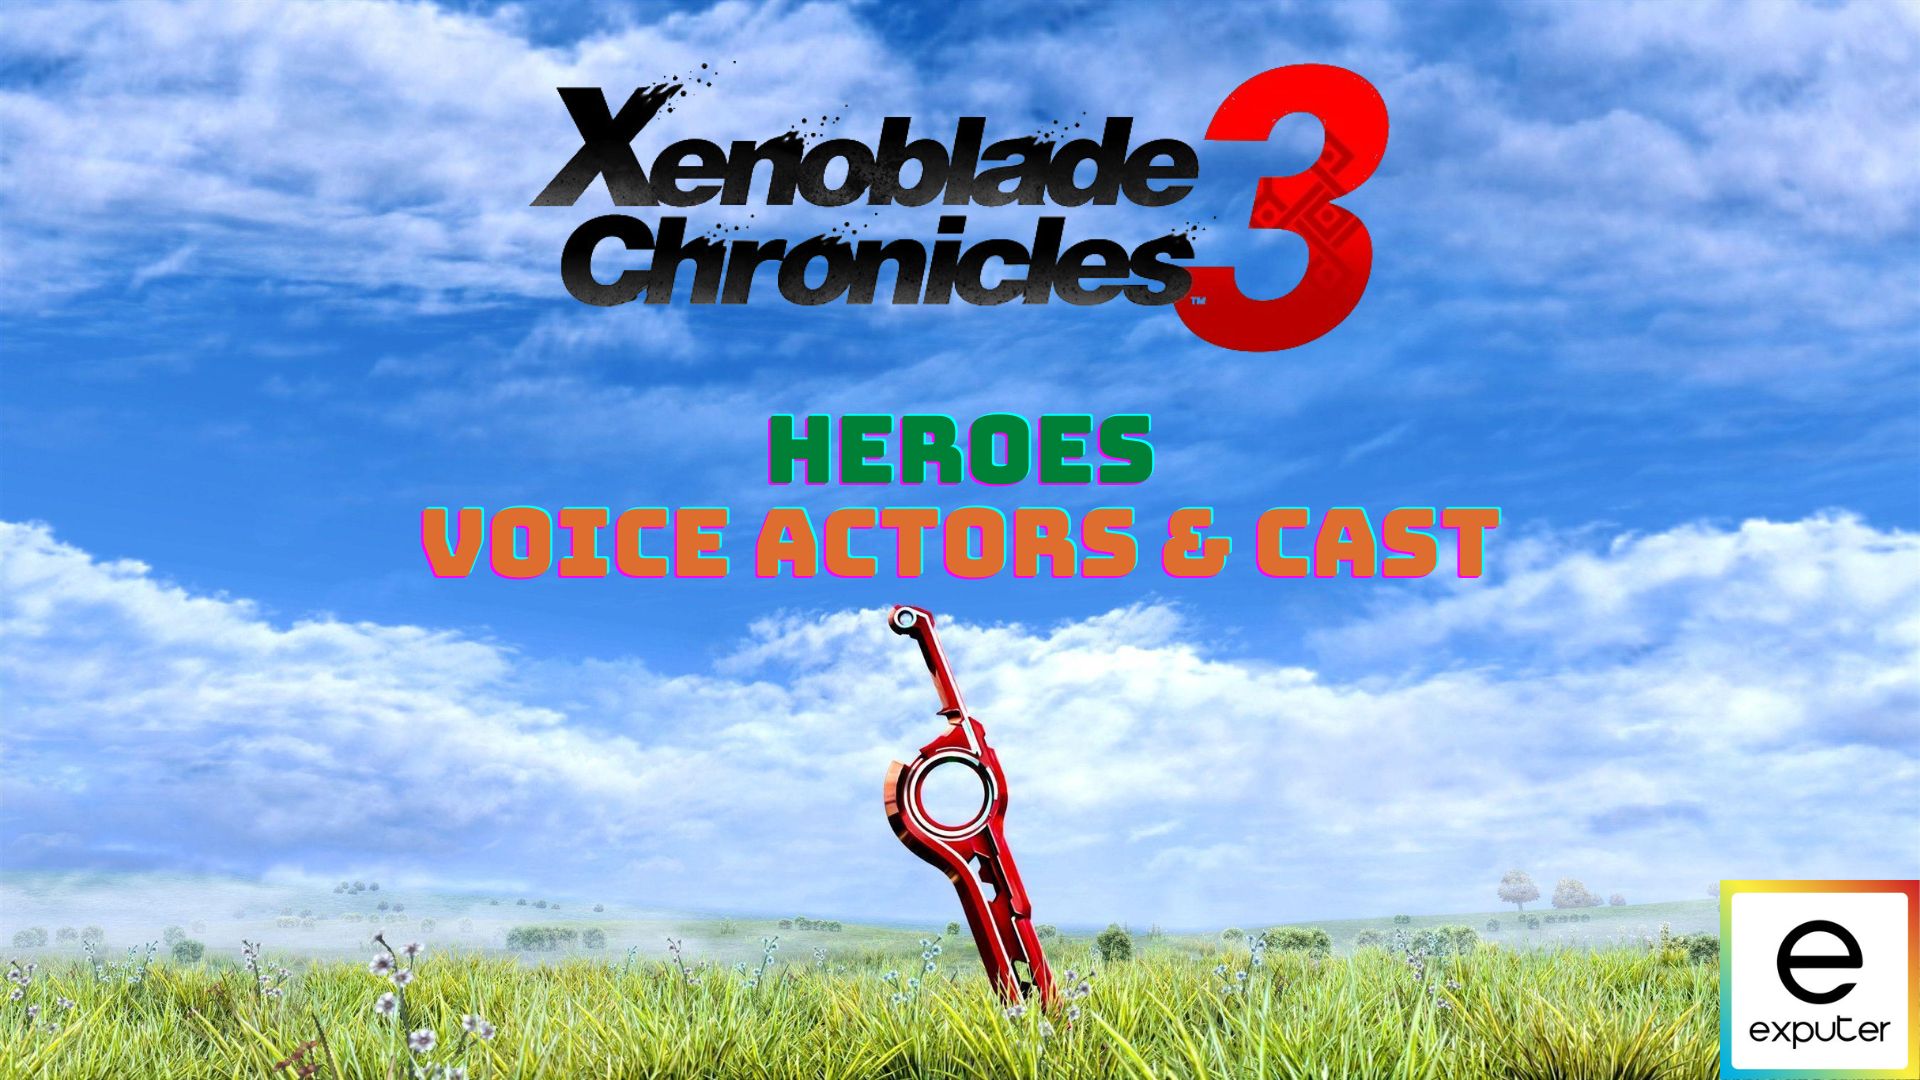 voice Actors of heroes in Xenoblade Chronicles 3.